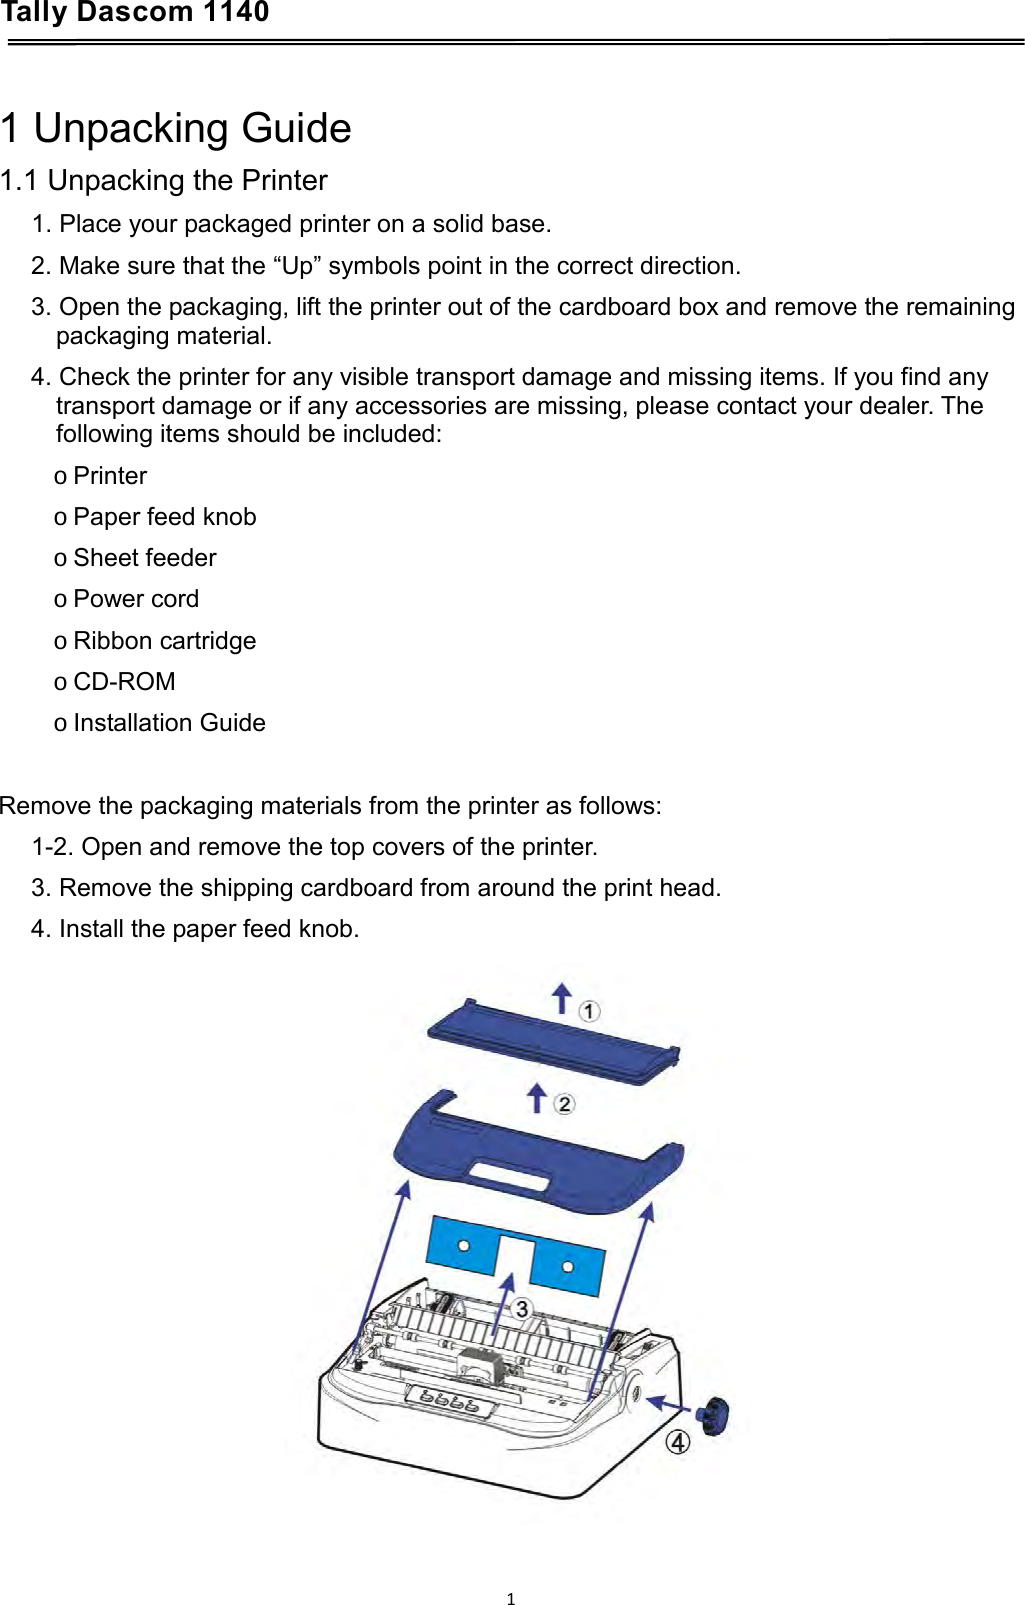 Tally Dascom 1140    1 Unpacking Guide 1.1 Unpacking the Printer 1. Place your packaged printer on a solid base. 2. Make sure that the “Up” symbols point in the correct direction. 3. Open the packaging, lift the printer out of the cardboard box and remove the remaining packaging material. 4. Check the printer for any visible transport damage and missing items. If you find any transport damage or if any accessories are missing, please contact your dealer. The following items should be included: o Printer o Paper feed knob o Sheet feeder o Power cord o Ribbon cartridge o CD-ROM o Installation Guide  Remove the packaging materials from the printer as follows: 1-2. Open and remove the top covers of the printer. 3. Remove the shipping cardboard from around the print head. 4. Install the paper feed knob.  1  